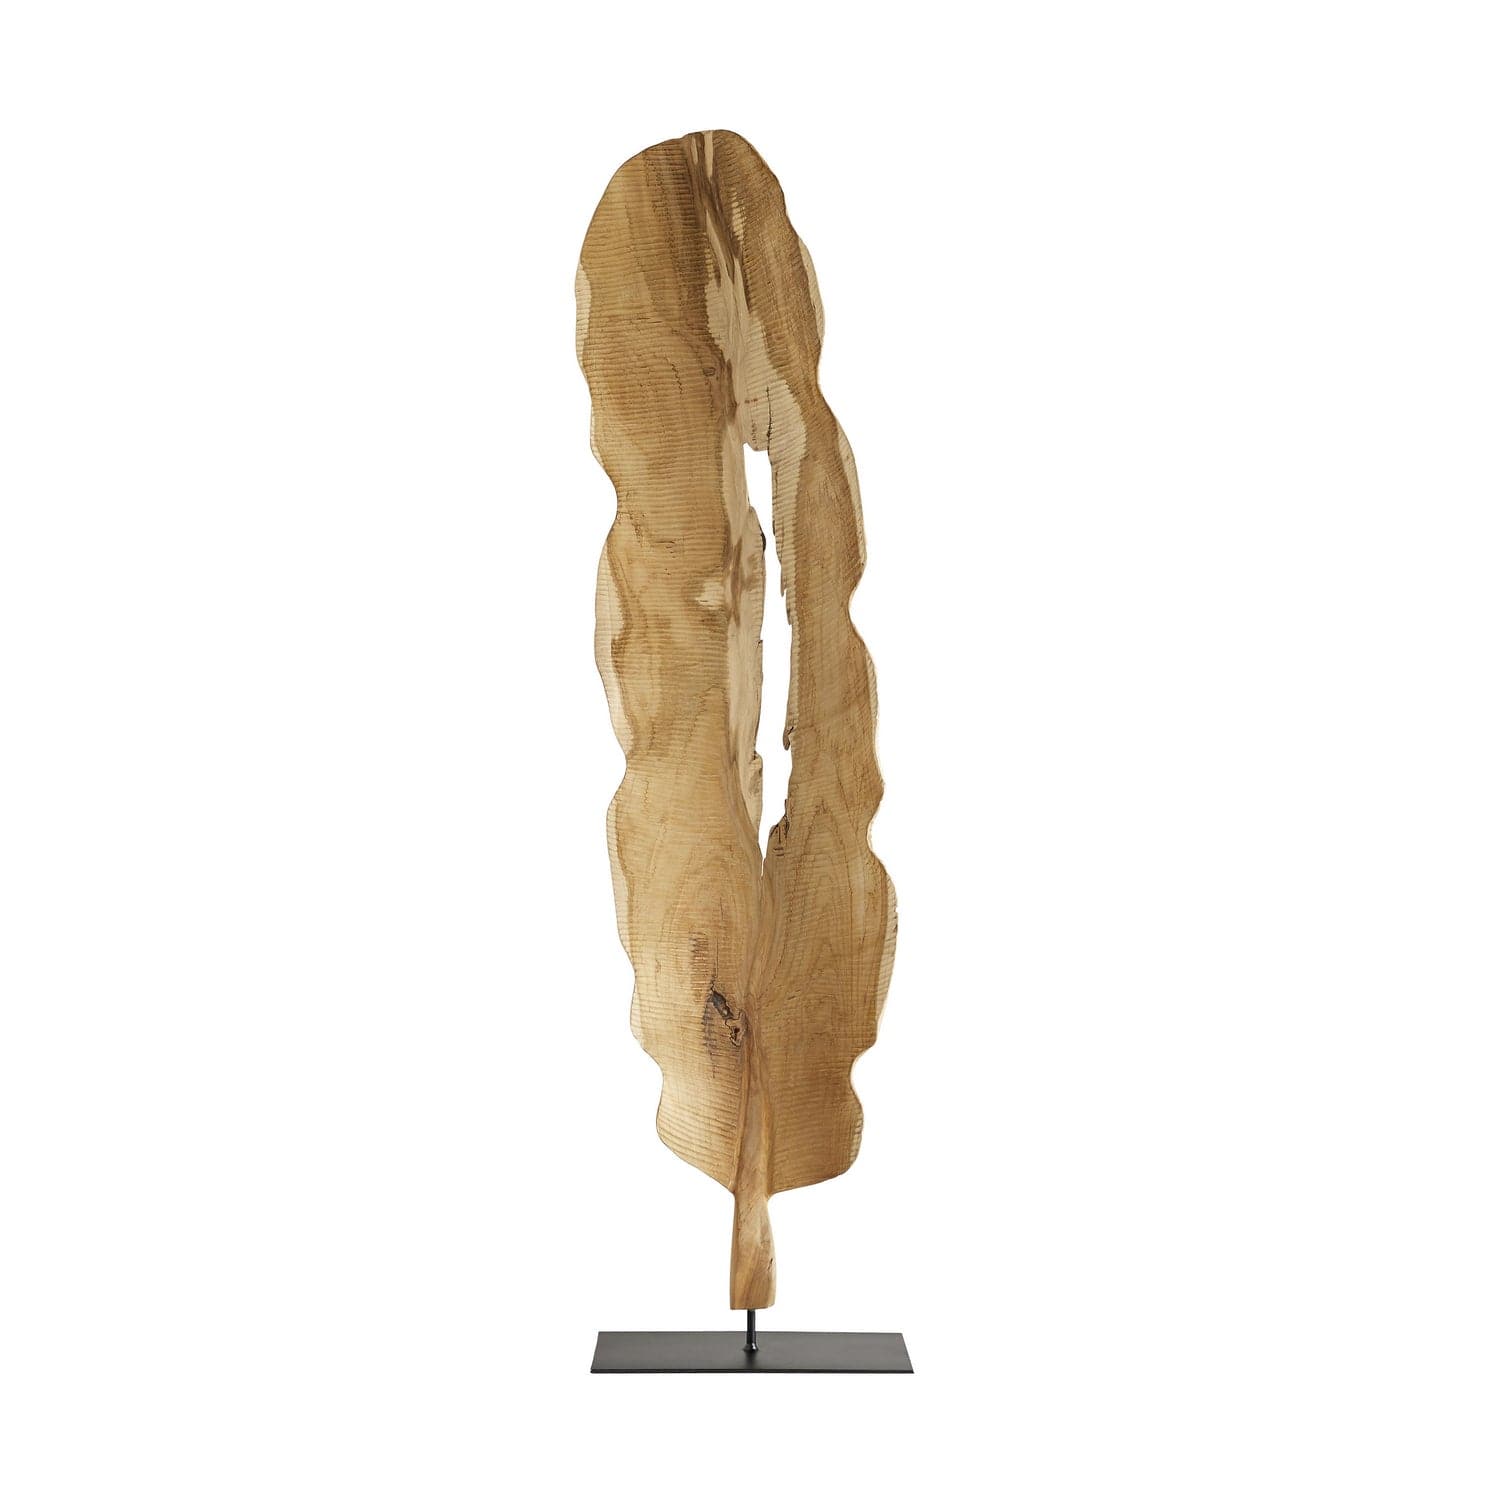 Sculpture from the Dugan collection in Natural finish